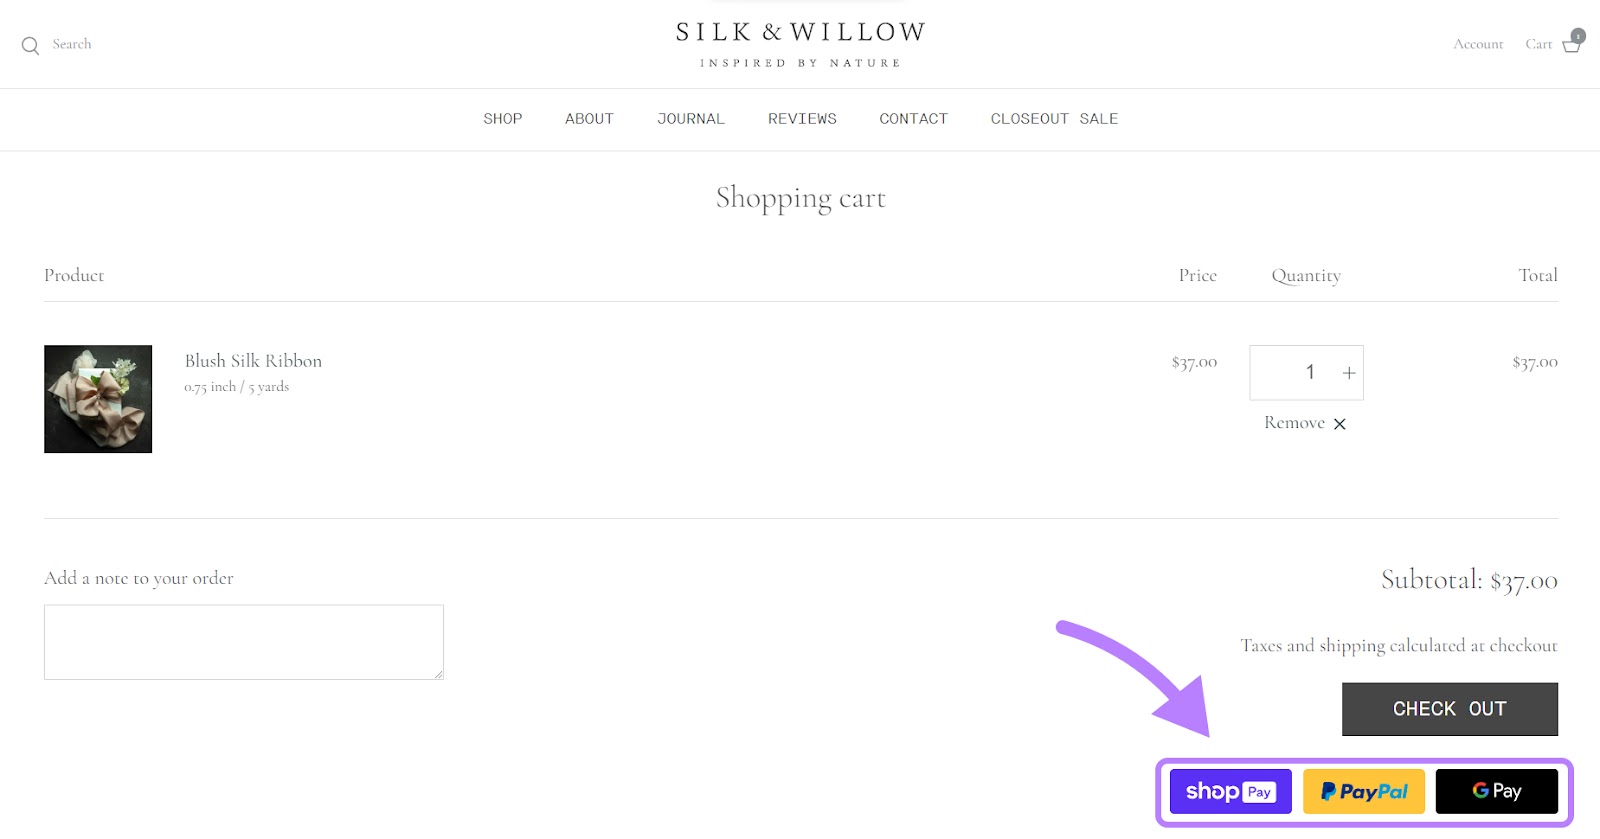 Shopify’s built-in payment gateway